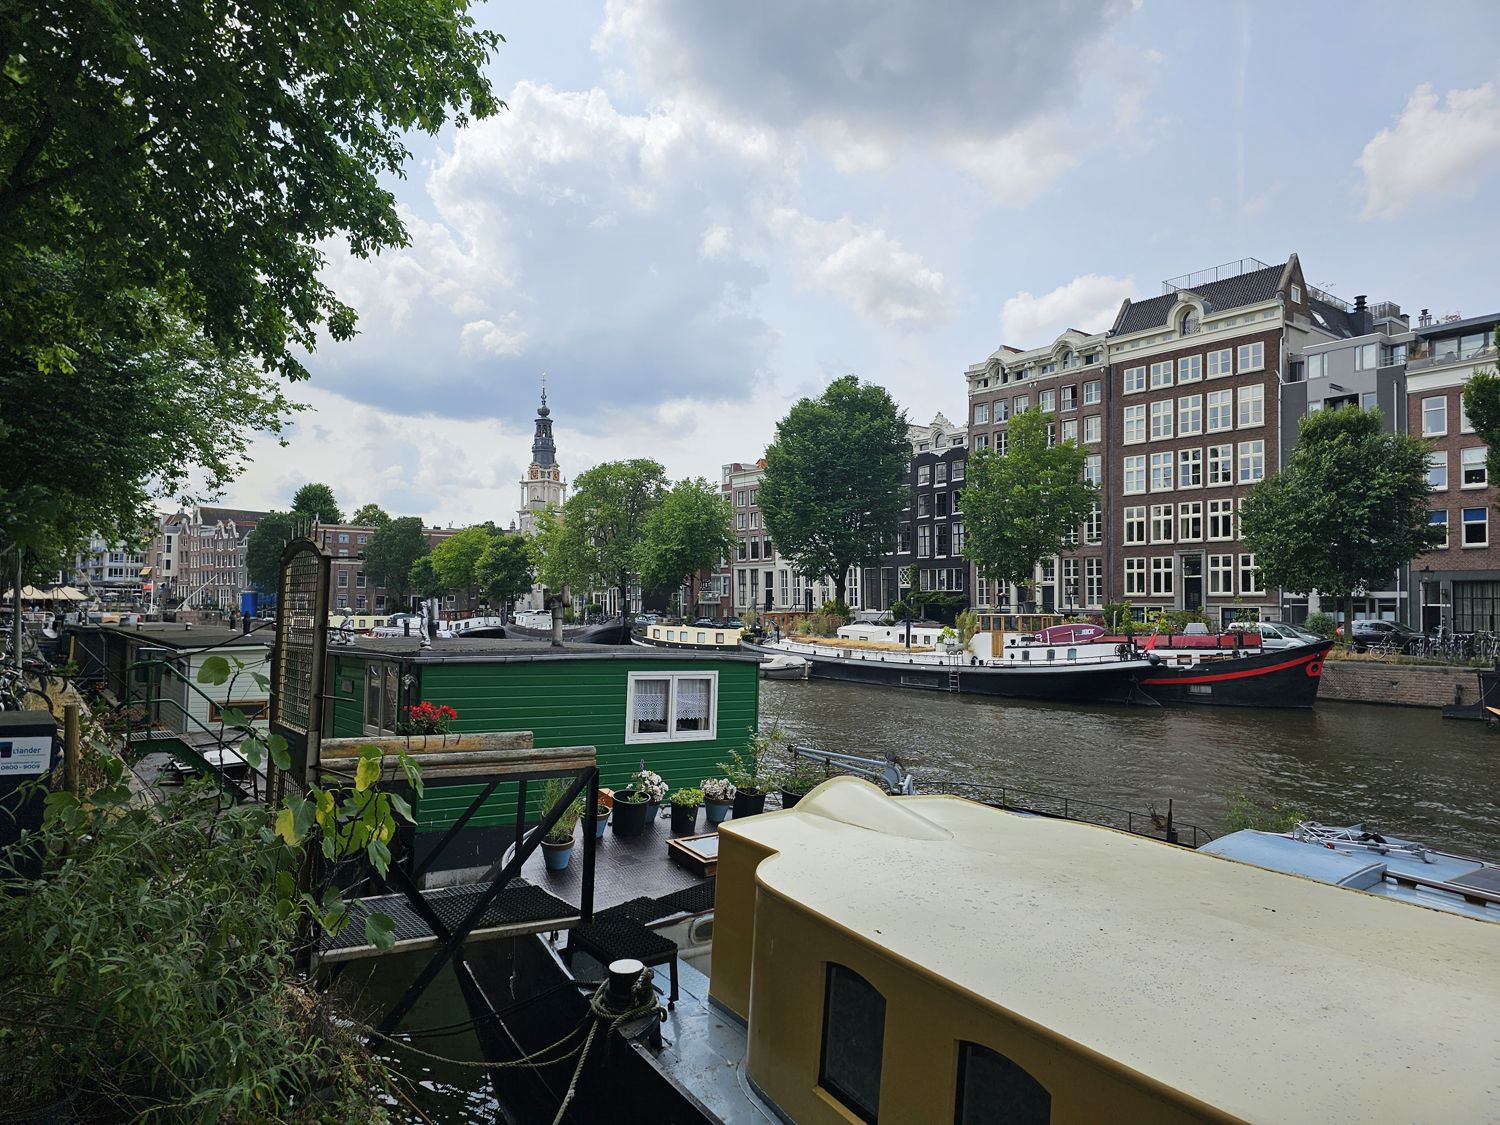 images/hm-law-oudeschans-amsterdam/hm-law-oudeschans-amsterdam-1.jpg#joomlaImage://local-images/hm-law-oudeschans-amsterdam/hm-law-oudeschans-amsterdam-1.jpg?width=1500&height=1125